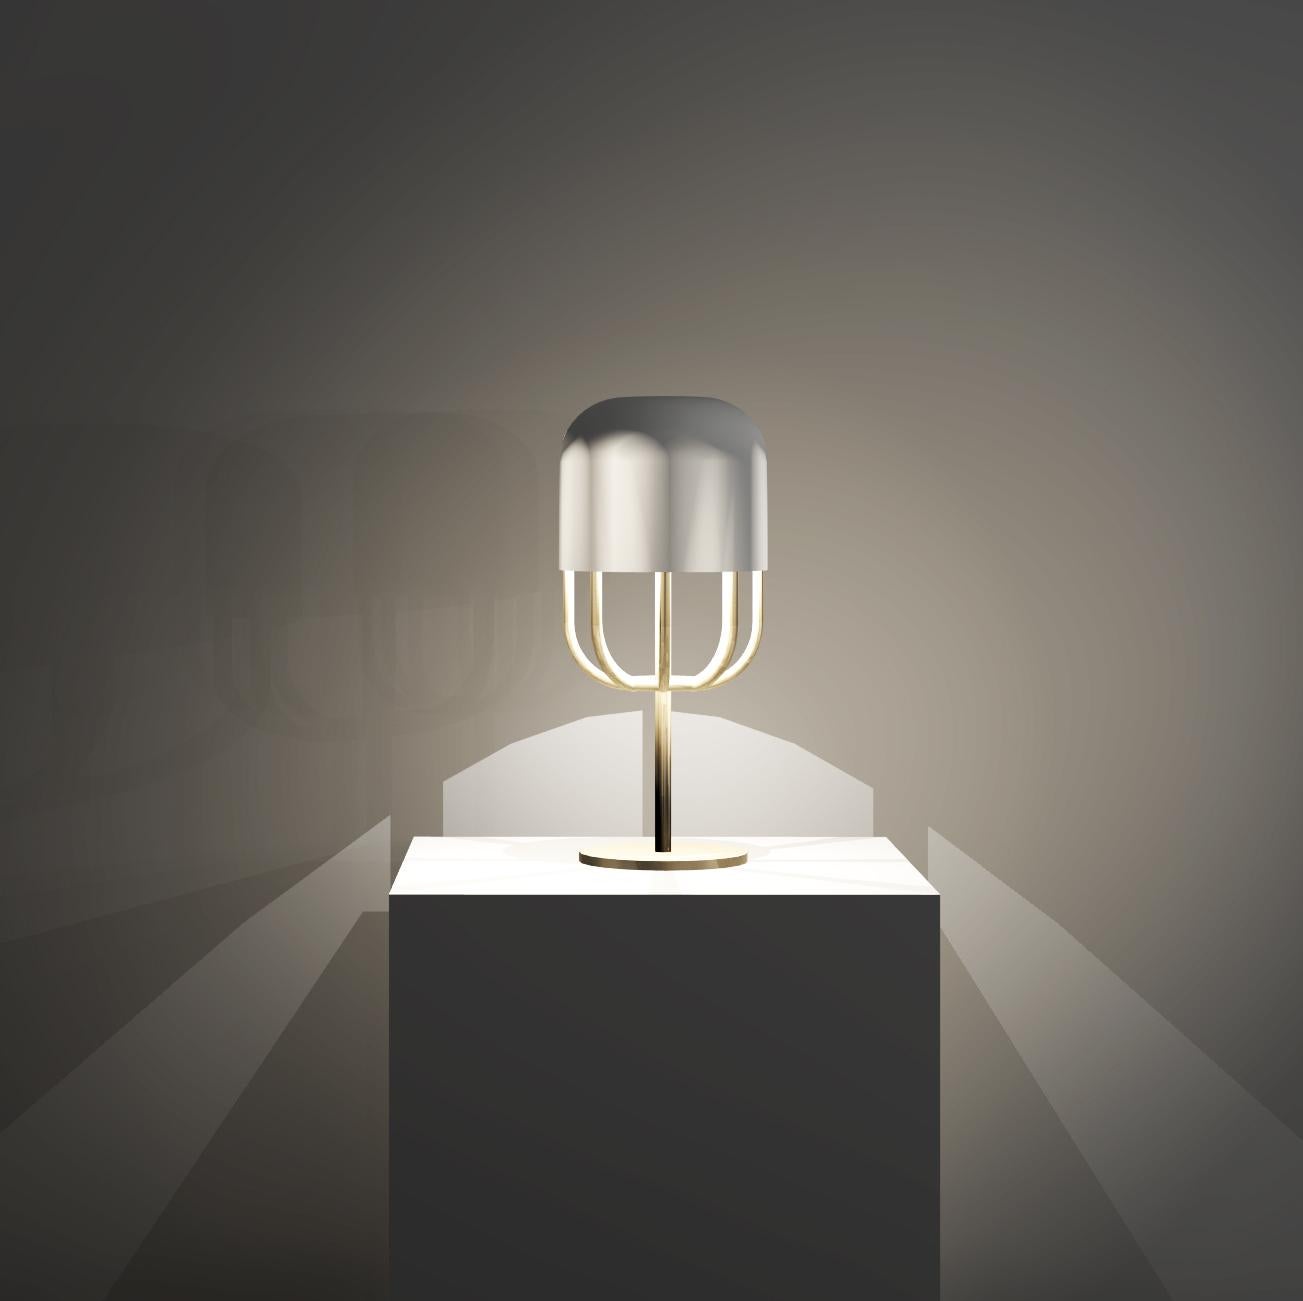 This table lamp has a bold design that uses symmetry between the outer casing and the frame of a capsule shape. The soft glow of opal glass is elegantly supported and highlighted by a beautiful brushed brass structure.
Metalwork can be powder-coated